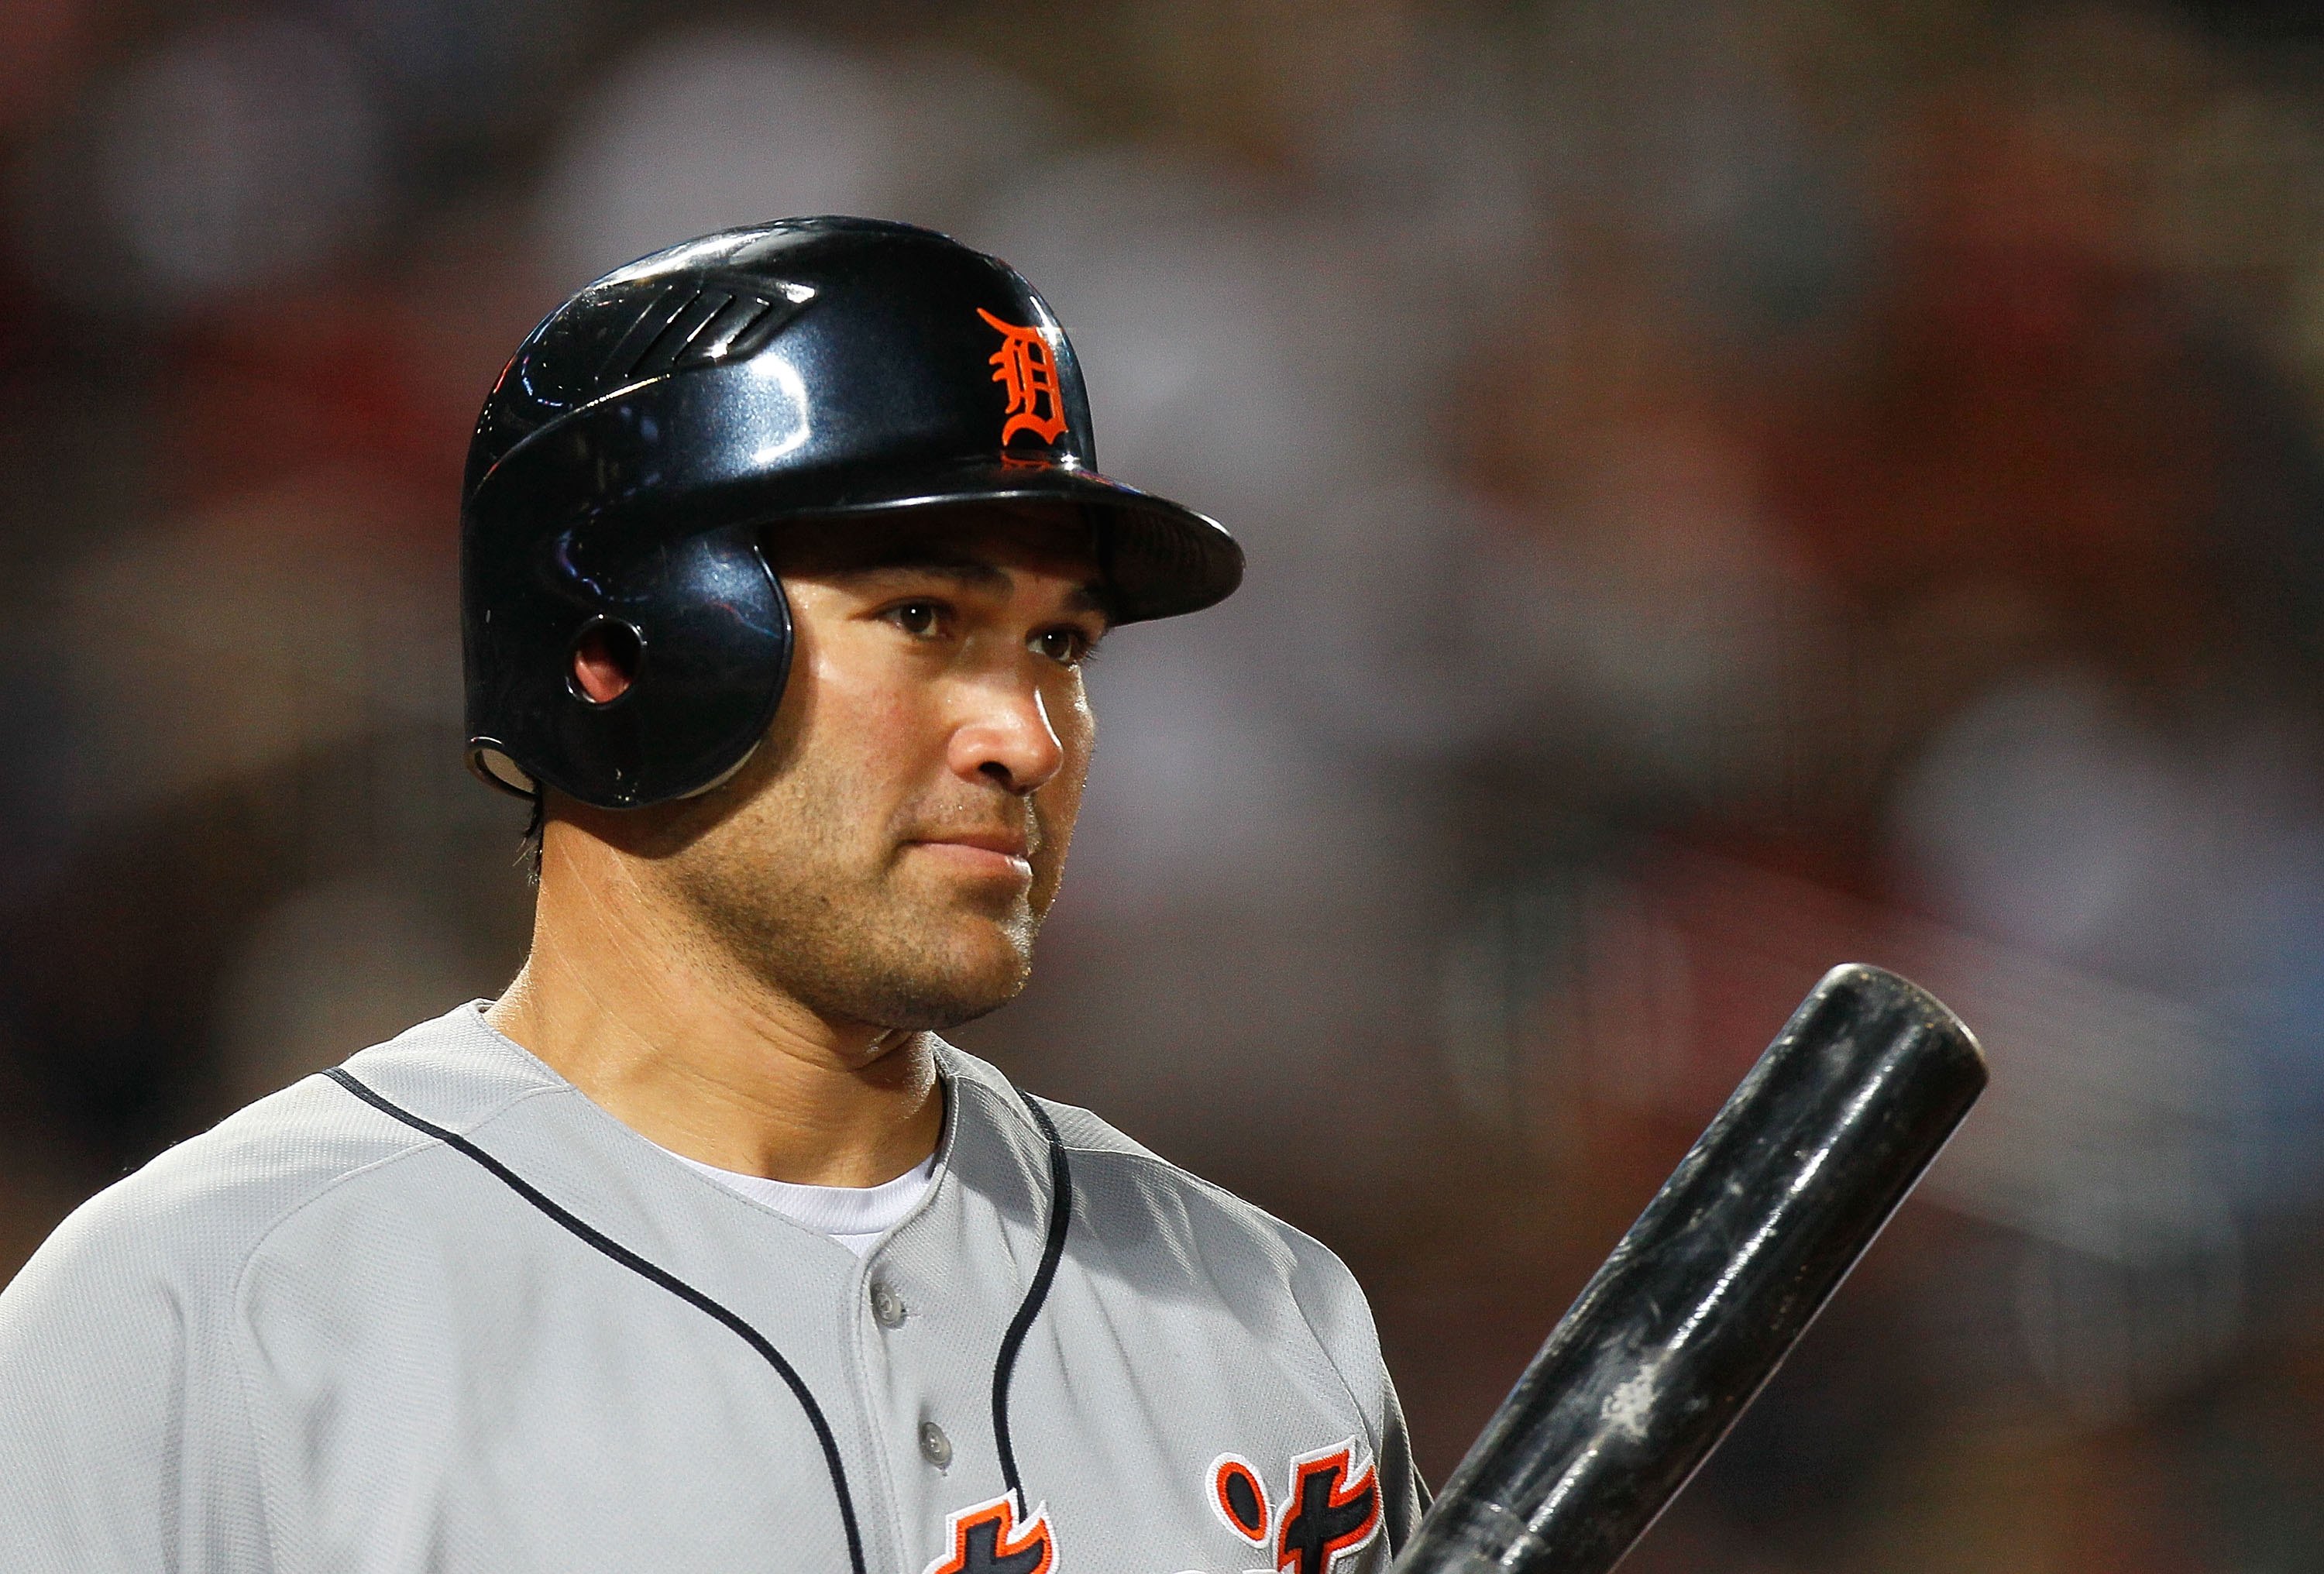 Johnny Damon and 12 Other AL Players Who Would Struggle in the NL